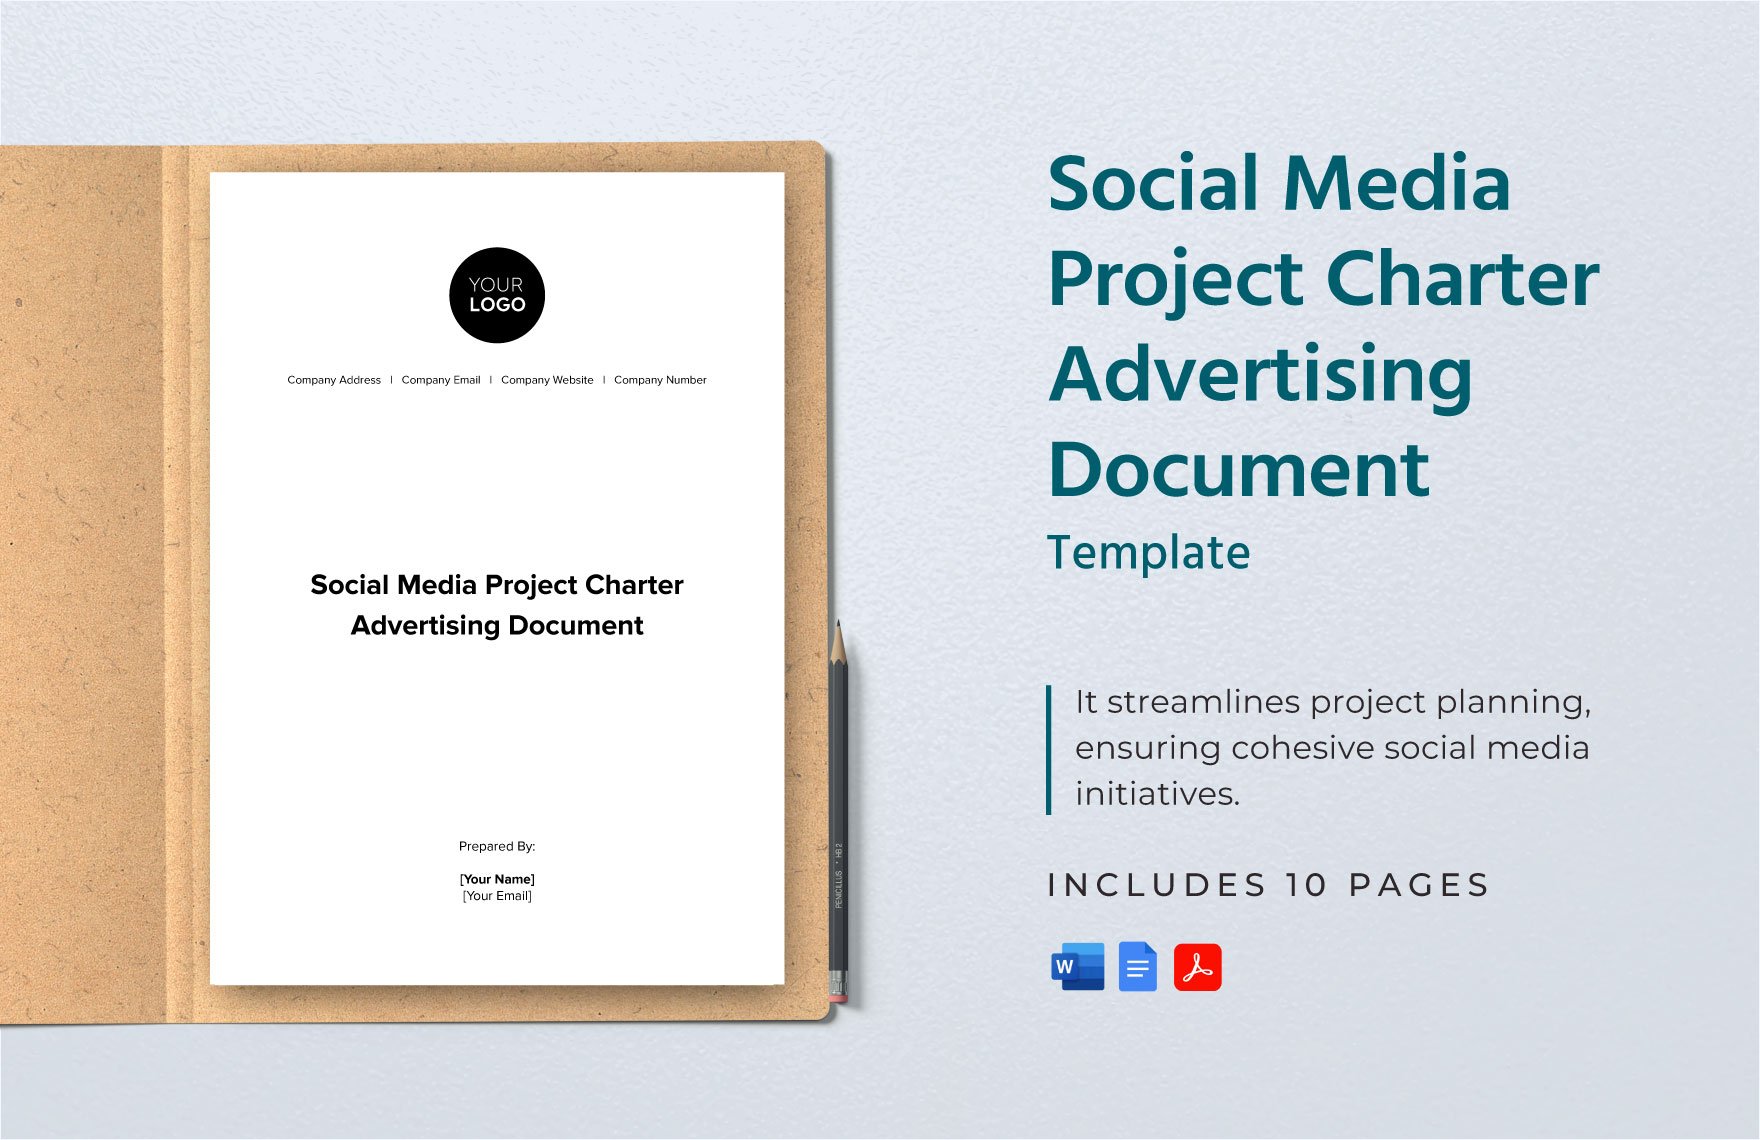 Social Media Project Charter Advertising Document Template in Word, Google Docs, PDF